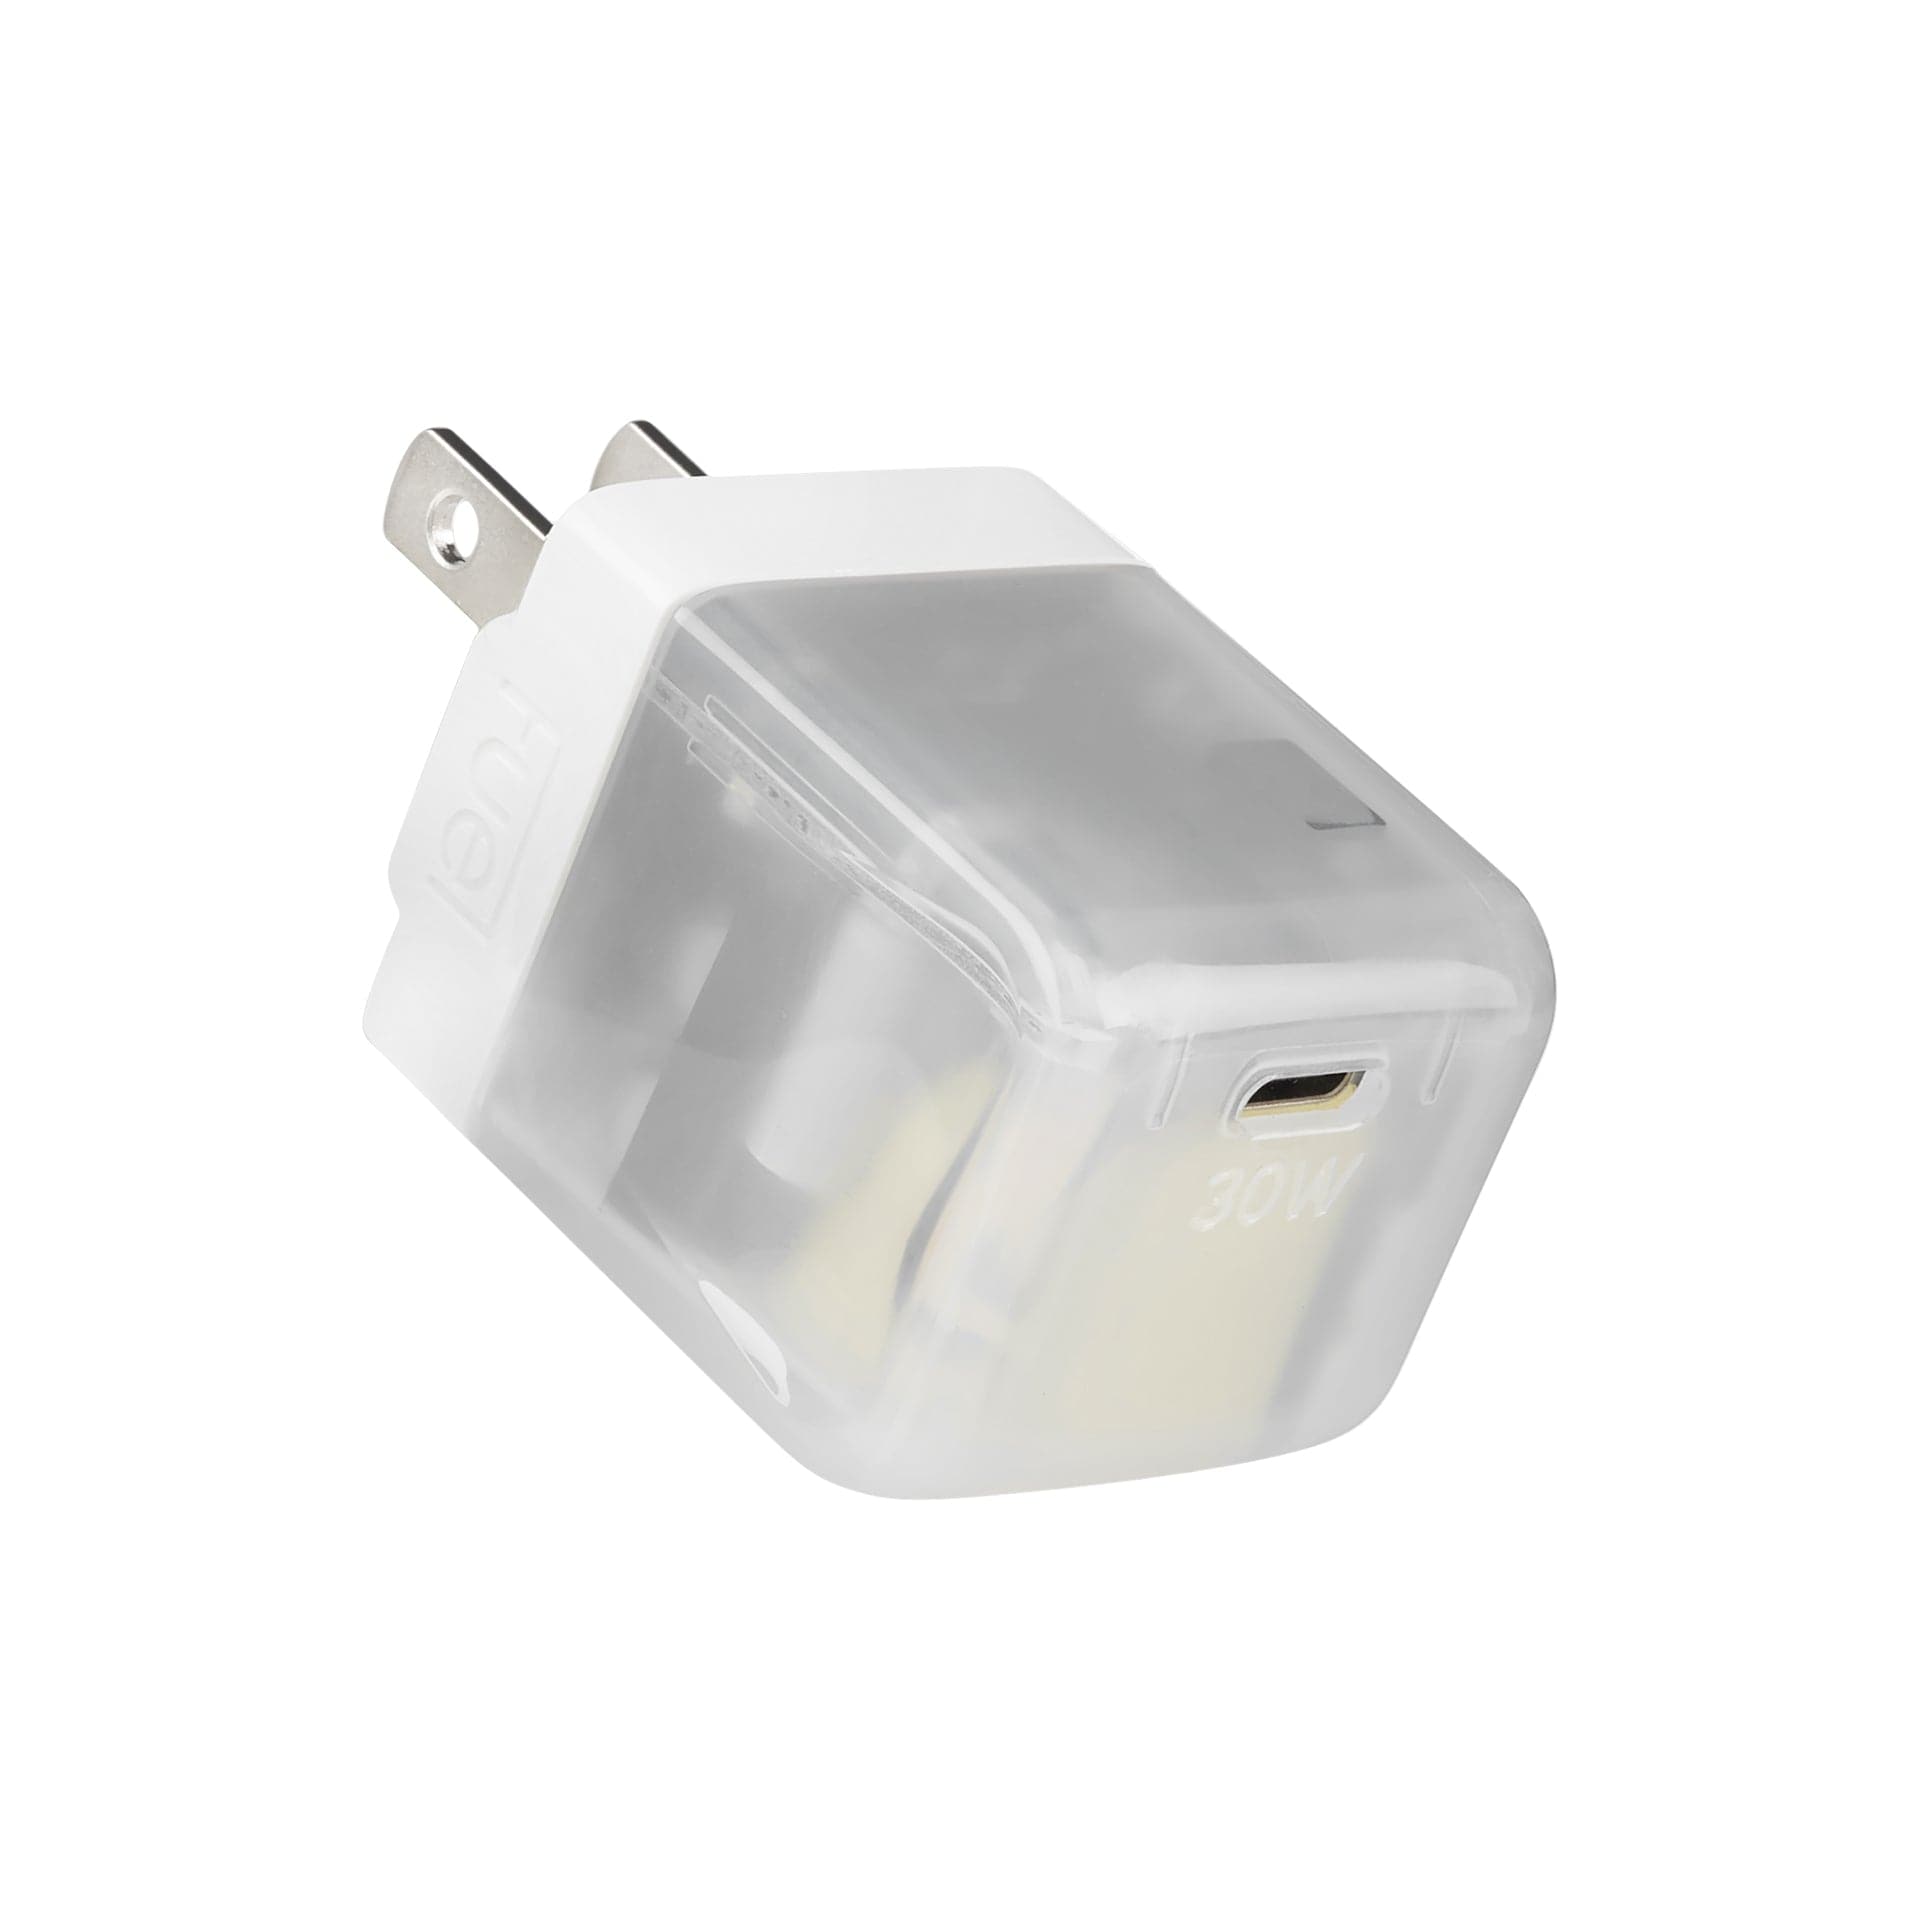 FUEL USB C Wall Charger (Frosted White) - Wall Charger